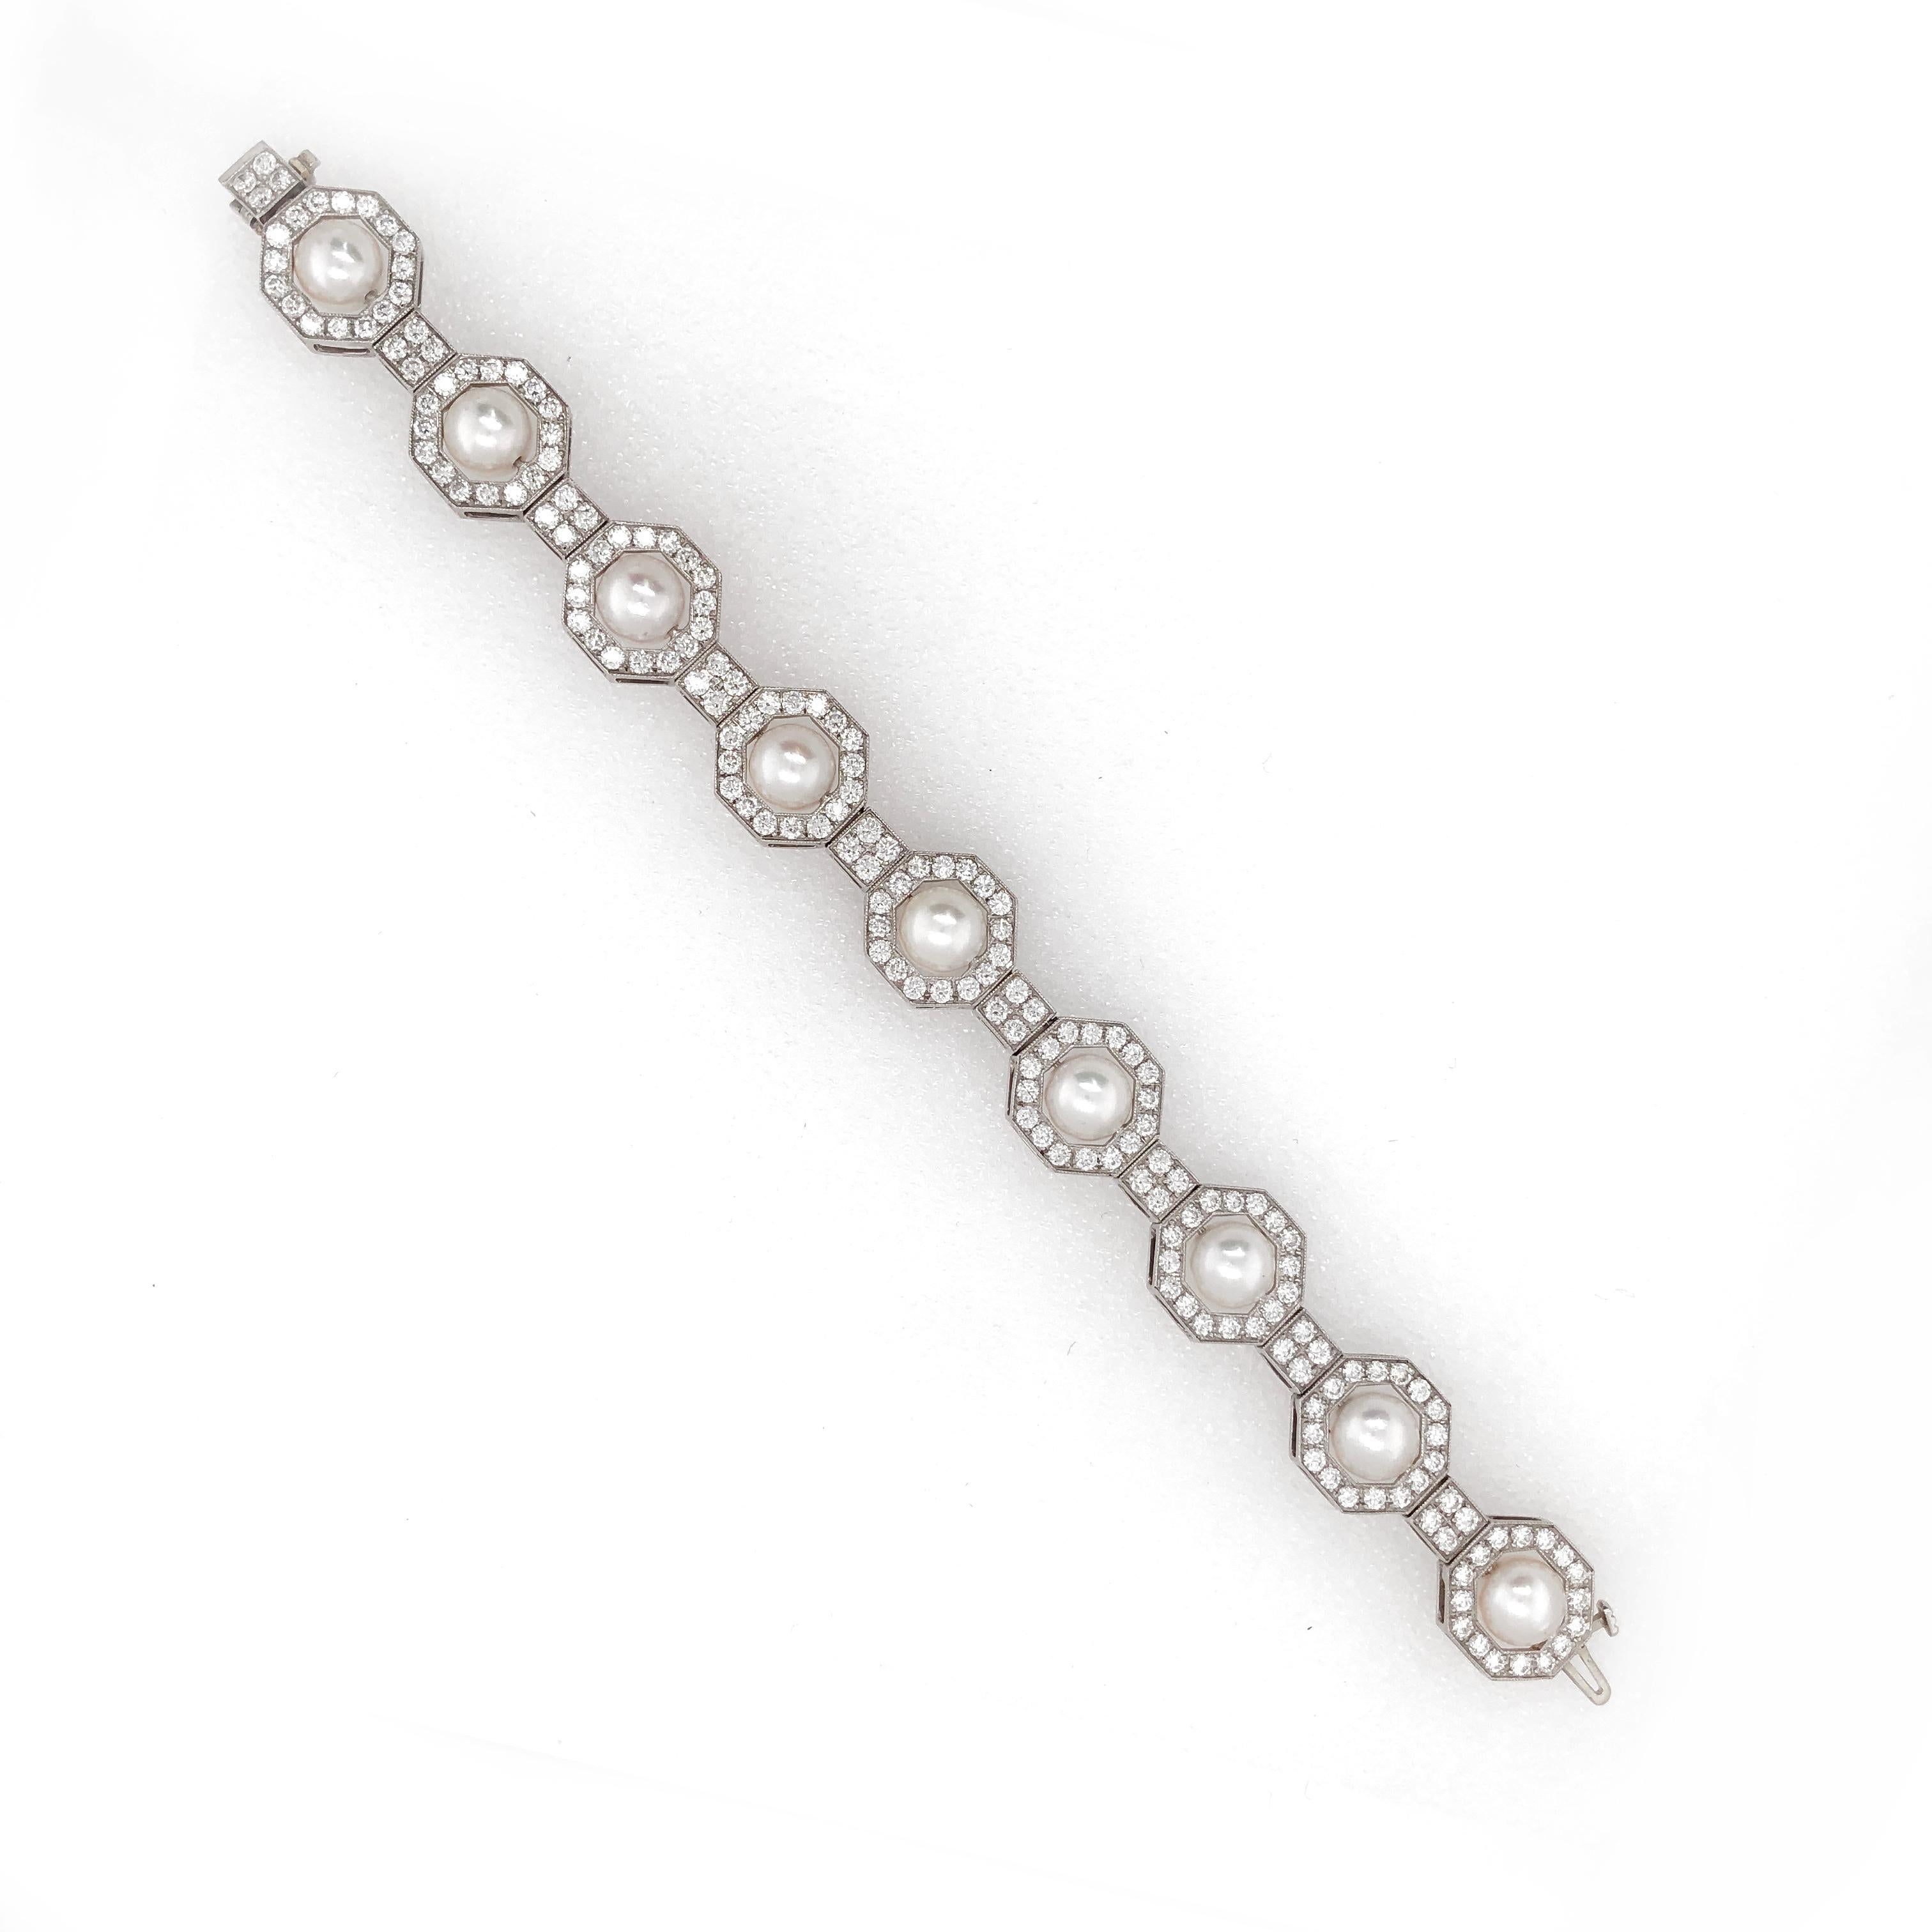 Art Deco Inspired Round Pearls Diamonds 6.35 Carat Platinum Bracelet In New Condition For Sale In New York, NY